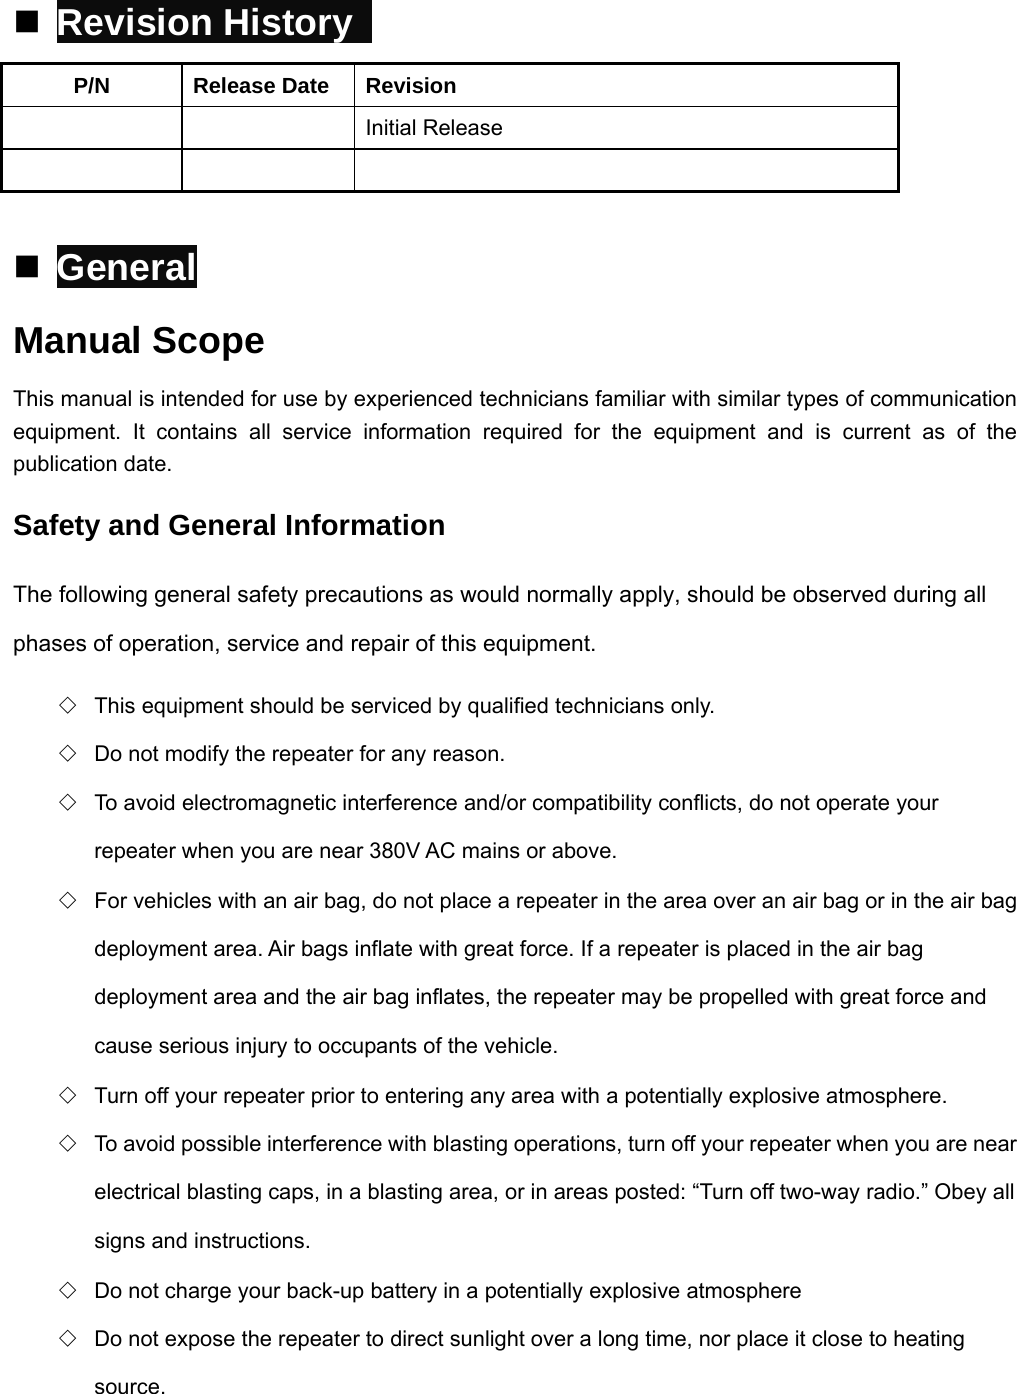  Revision History   P/N Release Date Revision   Initial Release      General Manual Scope This manual is intended for use by experienced technicians familiar with similar types of communication equipment. It contains all service information required for the equipment and is current as of the publication date. Safety and General Information The following general safety precautions as would normally apply, should be observed during all phases of operation, service and repair of this equipment. ◇  This equipment should be serviced by qualified technicians only. ◇  Do not modify the repeater for any reason. ◇  To avoid electromagnetic interference and/or compatibility conflicts, do not operate your repeater when you are near 380V AC mains or above. ◇  For vehicles with an air bag, do not place a repeater in the area over an air bag or in the air bag deployment area. Air bags inflate with great force. If a repeater is placed in the air bag deployment area and the air bag inflates, the repeater may be propelled with great force and cause serious injury to occupants of the vehicle. ◇  Turn off your repeater prior to entering any area with a potentially explosive atmosphere. ◇  To avoid possible interference with blasting operations, turn off your repeater when you are near electrical blasting caps, in a blasting area, or in areas posted: “Turn off two-way radio.” Obey all signs and instructions. ◇  Do not charge your back-up battery in a potentially explosive atmosphere ◇  Do not expose the repeater to direct sunlight over a long time, nor place it close to heating source. 